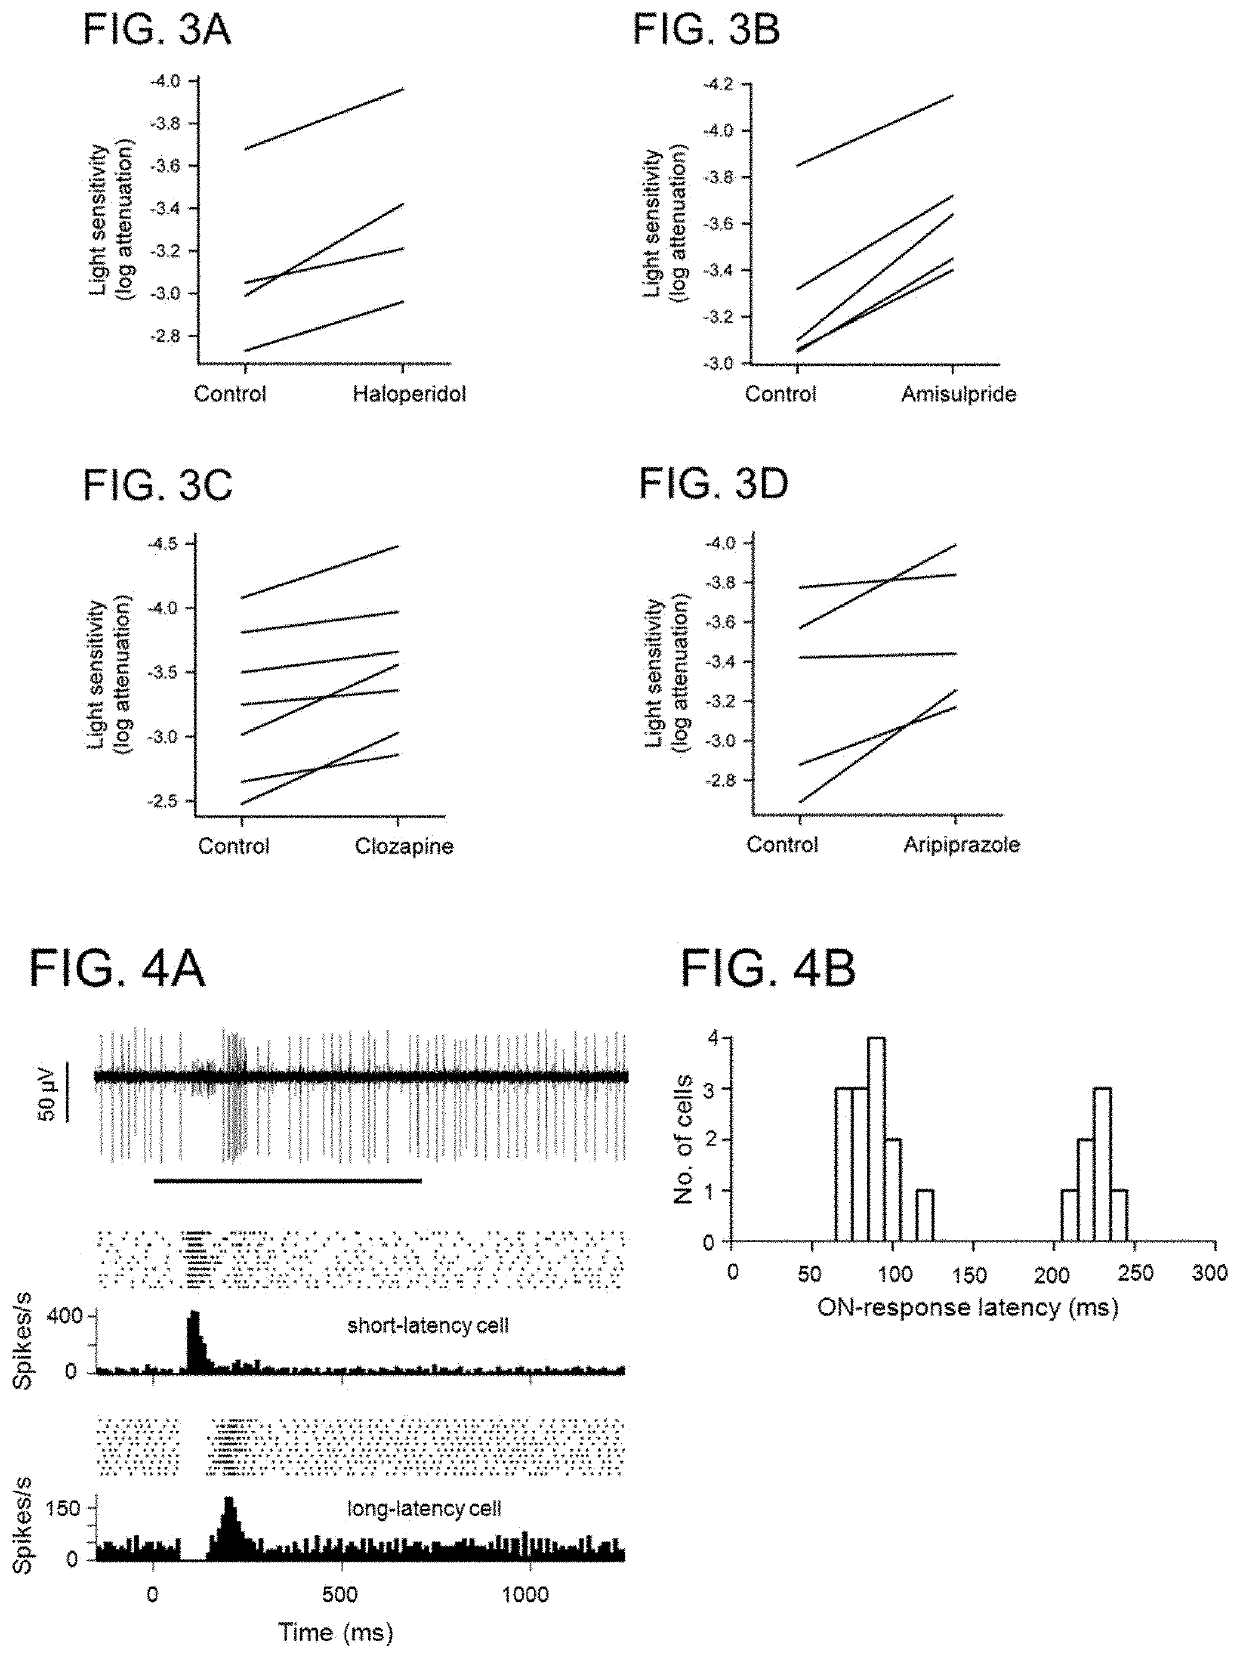 Use of dopamine and serotonin receptor antagonists for treatment in a subject with retinal degeneration